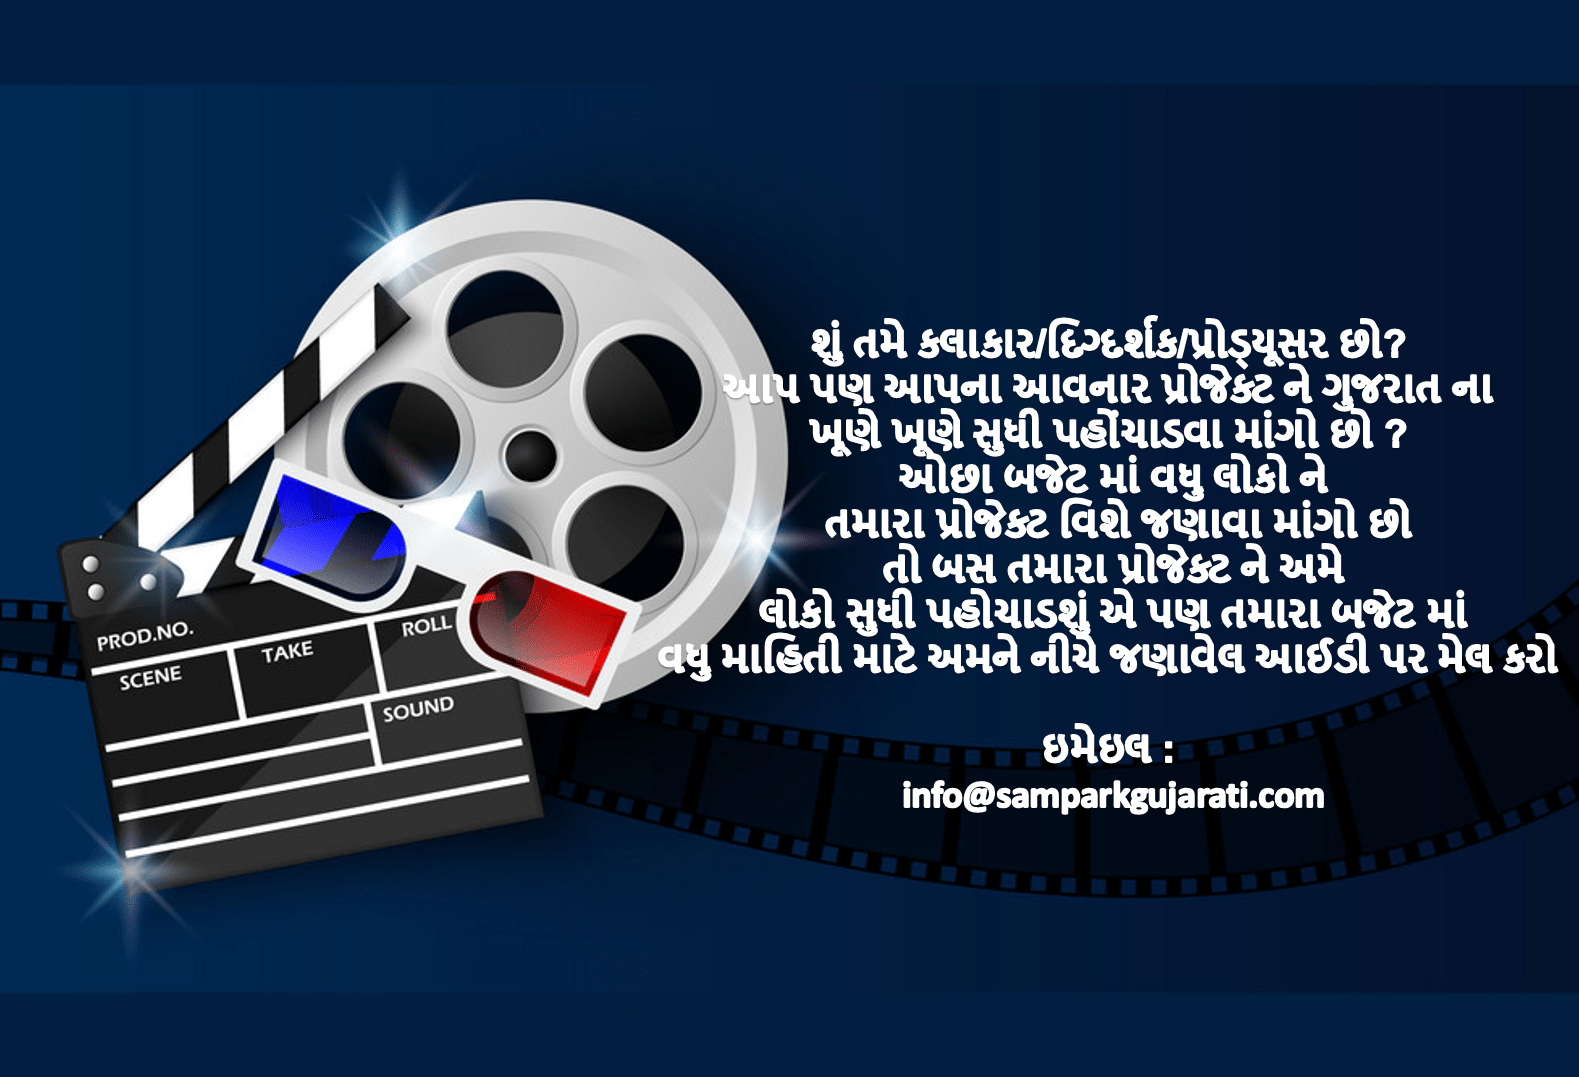 Promote Your film with us